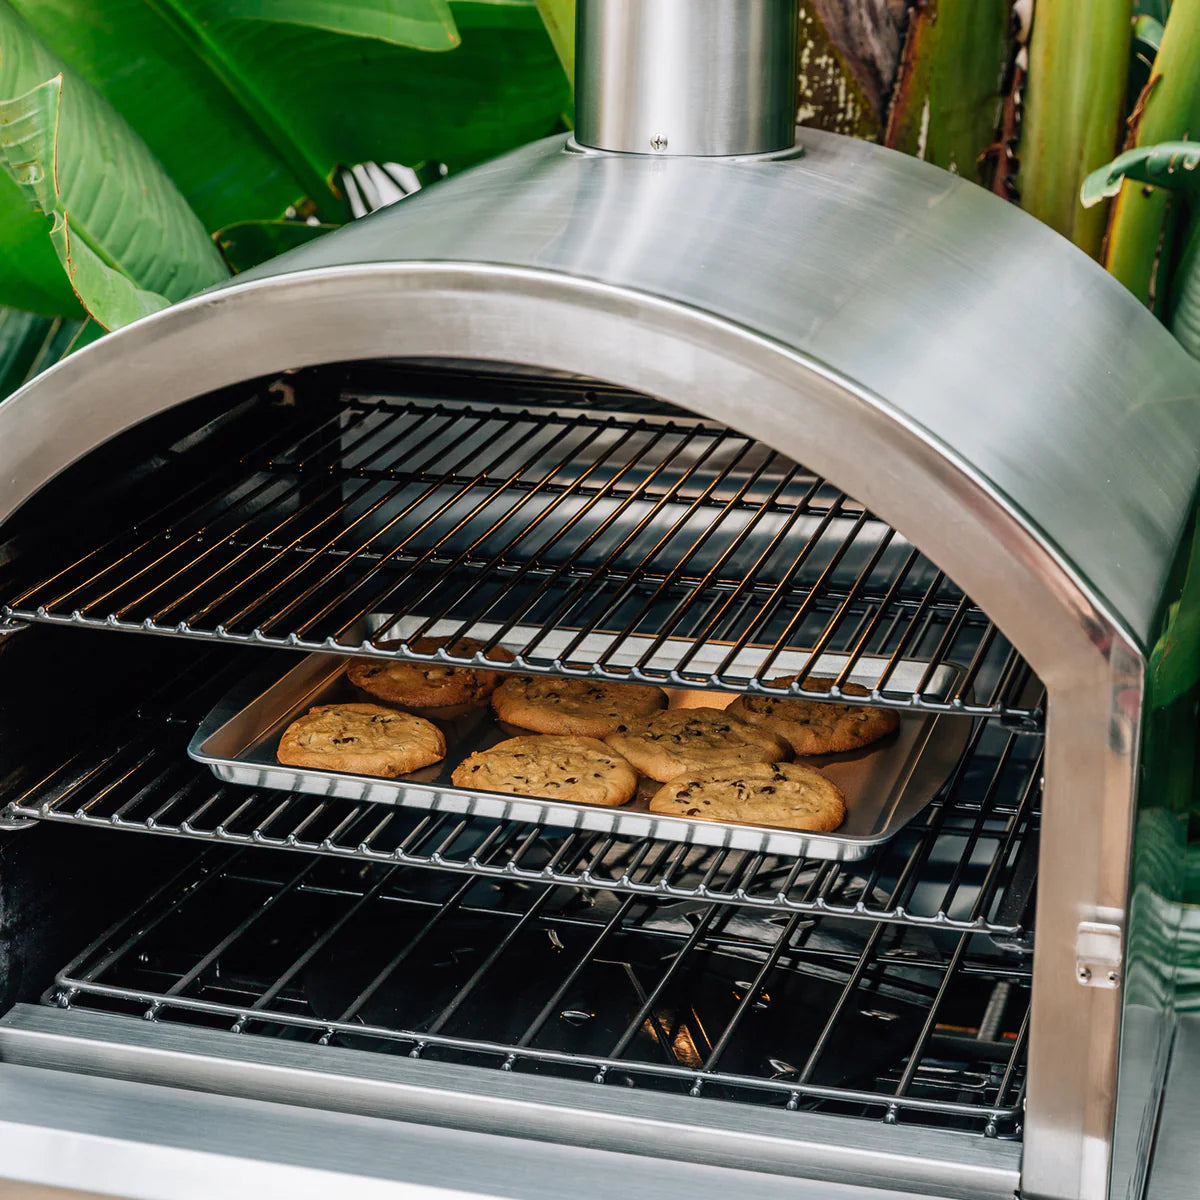 The Freestanding Outdoor Oven - Fireplace Trends